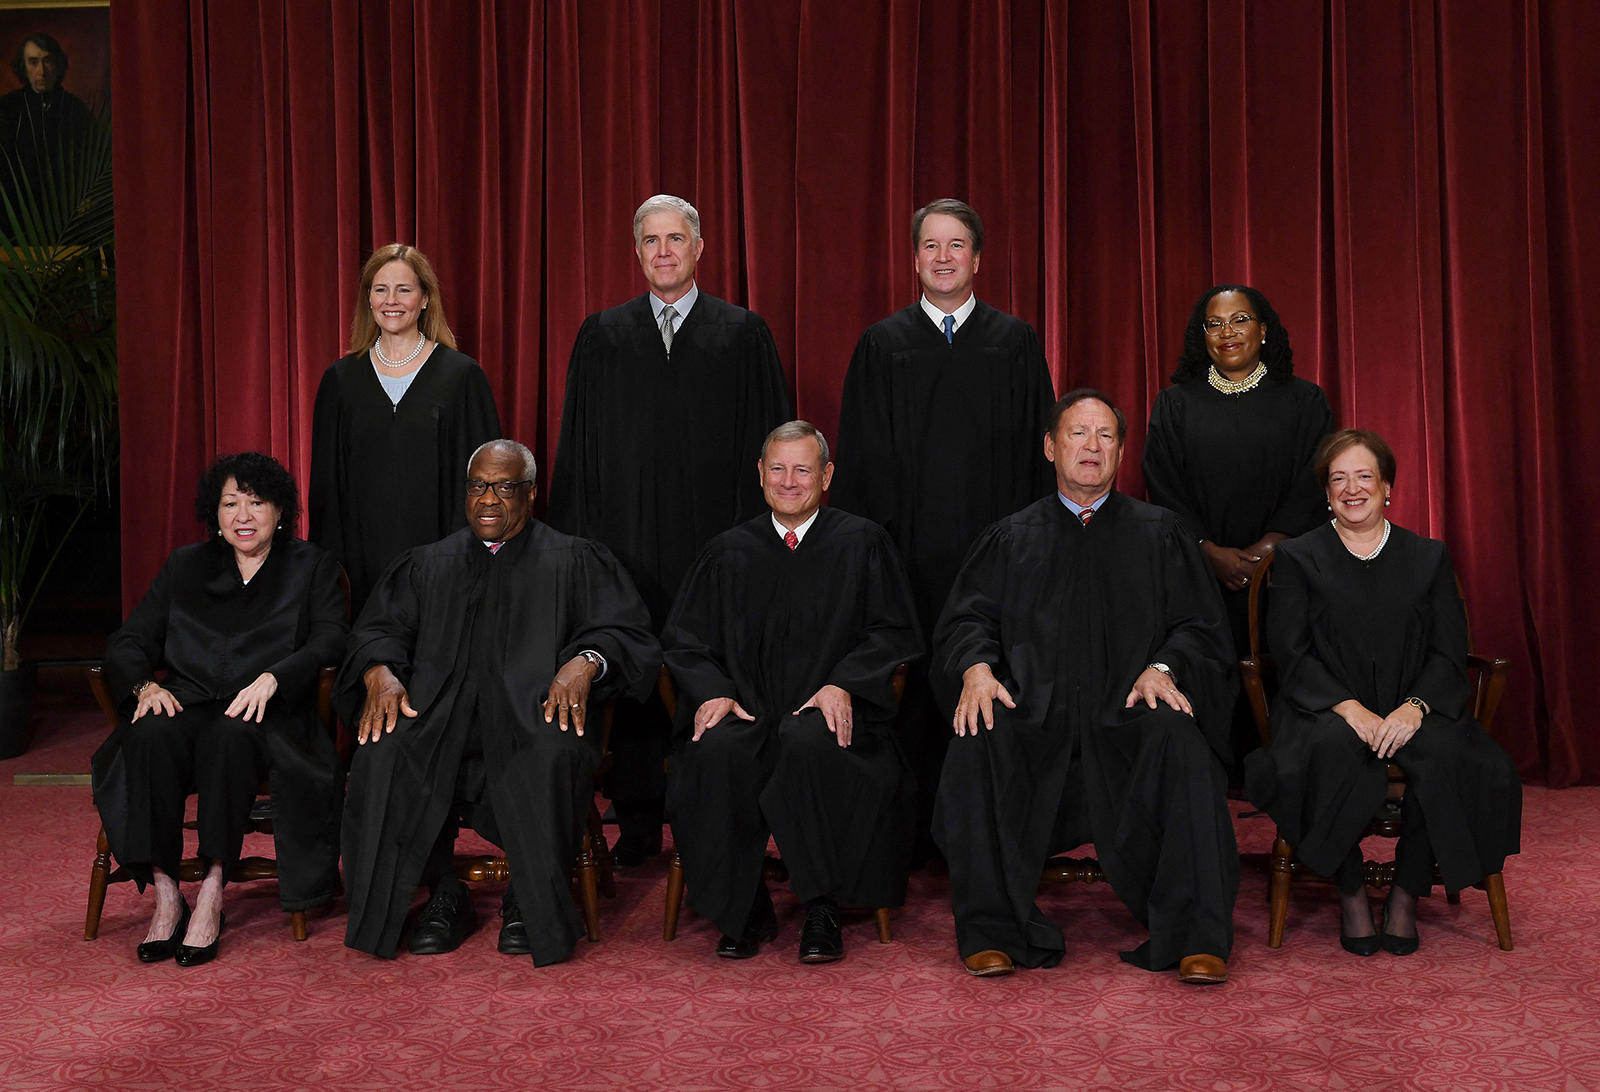 Justices of the U.S. Supreme Court pose for their official photo at the Supreme Court in Washington, DC on October 7, 2022. (Seated from left) Associate Justice Sonia Sotomayor, Associate Justice Clarence Thomas, Chief Justice John Roberts, Associate Justice Samuel Alito and Associate Justice Elena Kagan, (Standing behind from left) Associate Justice Amy Coney Barrett, Associate Justice Neil Gorsuch, Associate Justice Brett Kavanaugh and Associate Justice Ketanji Brown Jackson. 